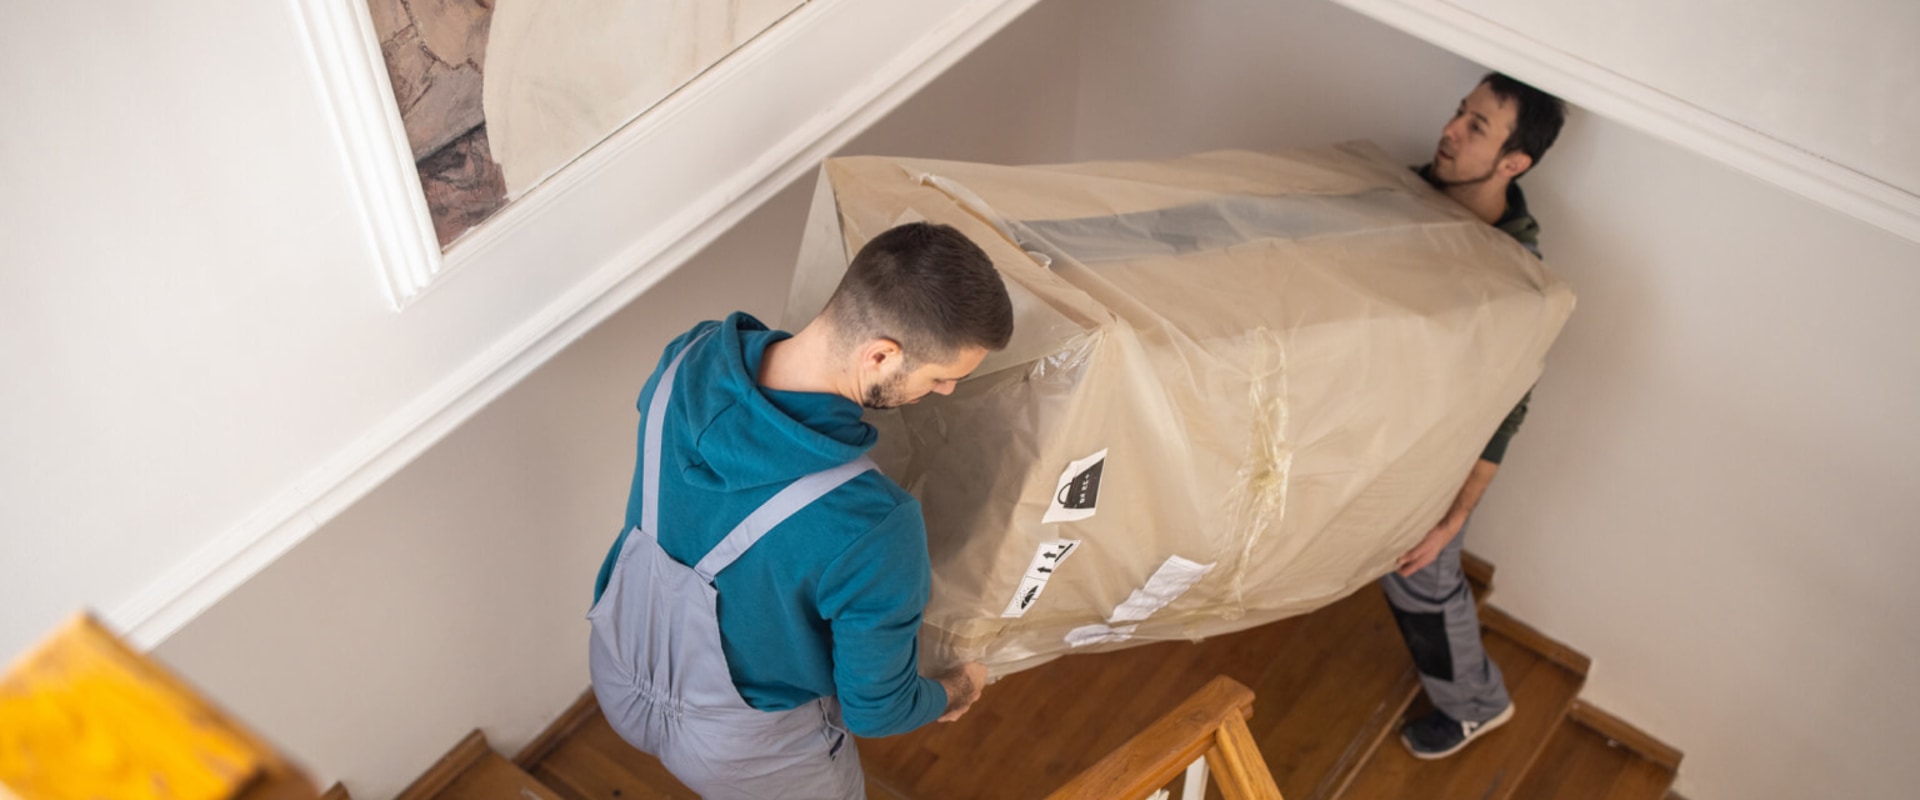 Is $50 a good tip for movers?